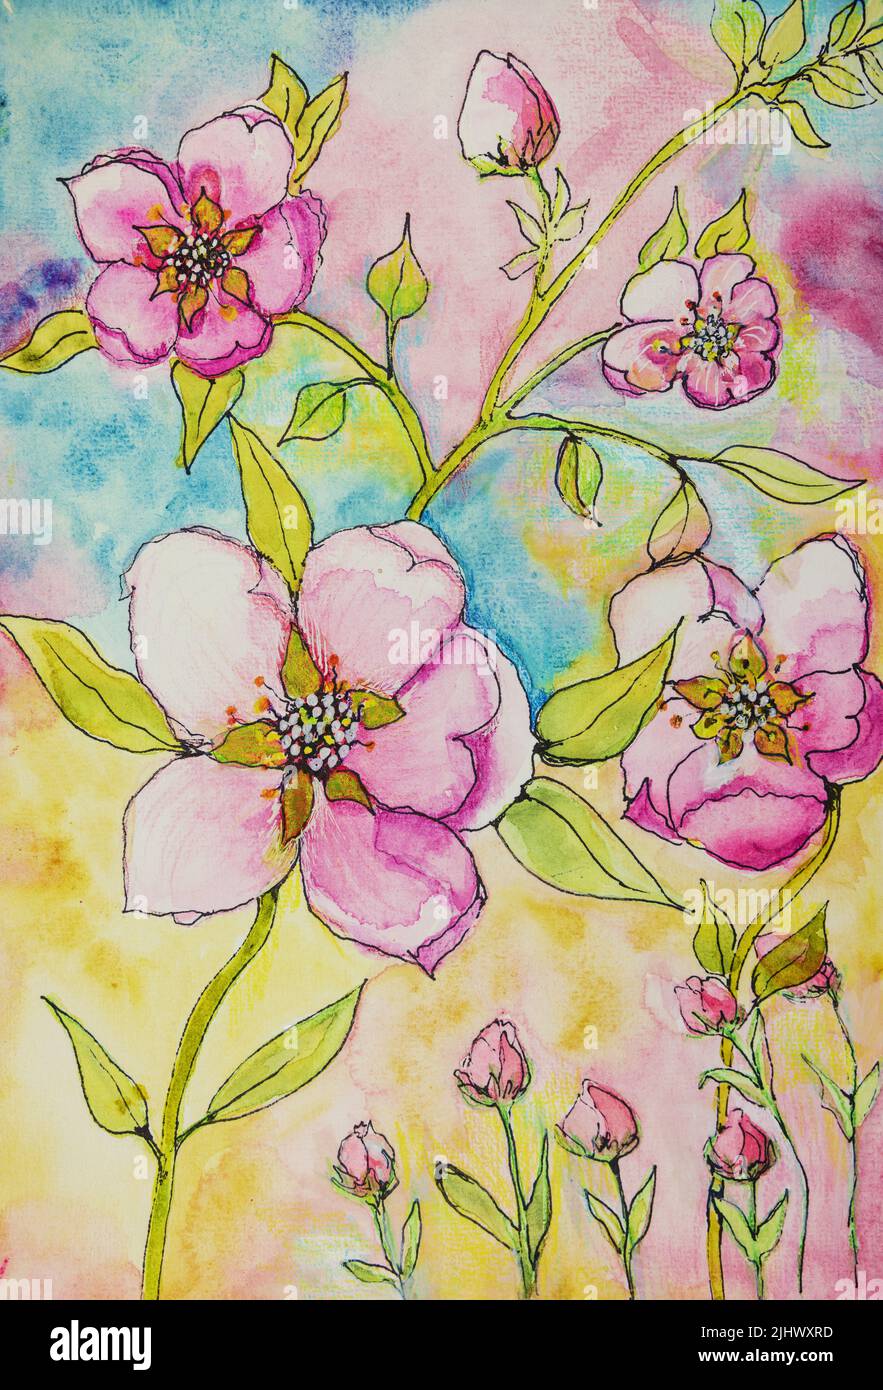 Sherry blossom watercolor doodle. The dabbing technique near the edges gives a soft focus effect due to the altered surface roughness of the paper. Stock Photo